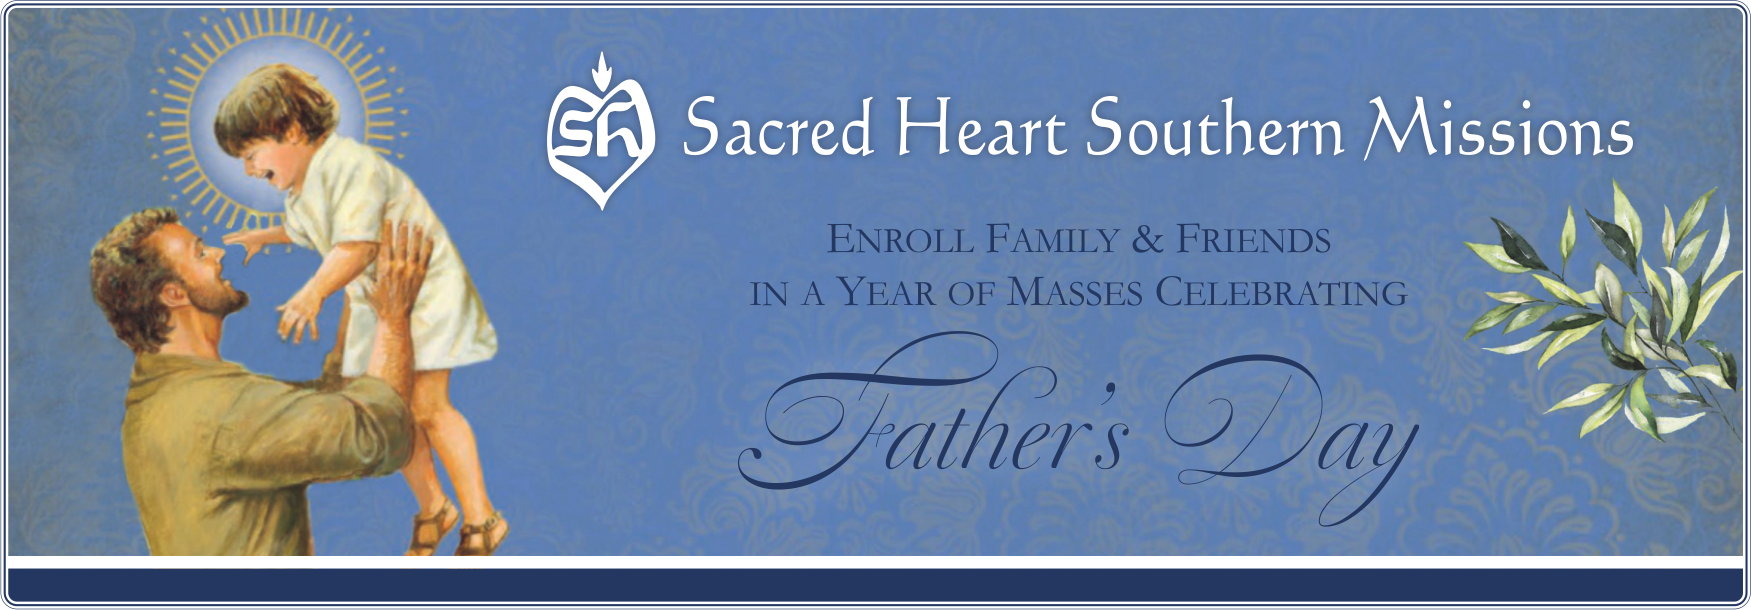 Father's Day Year of Masses